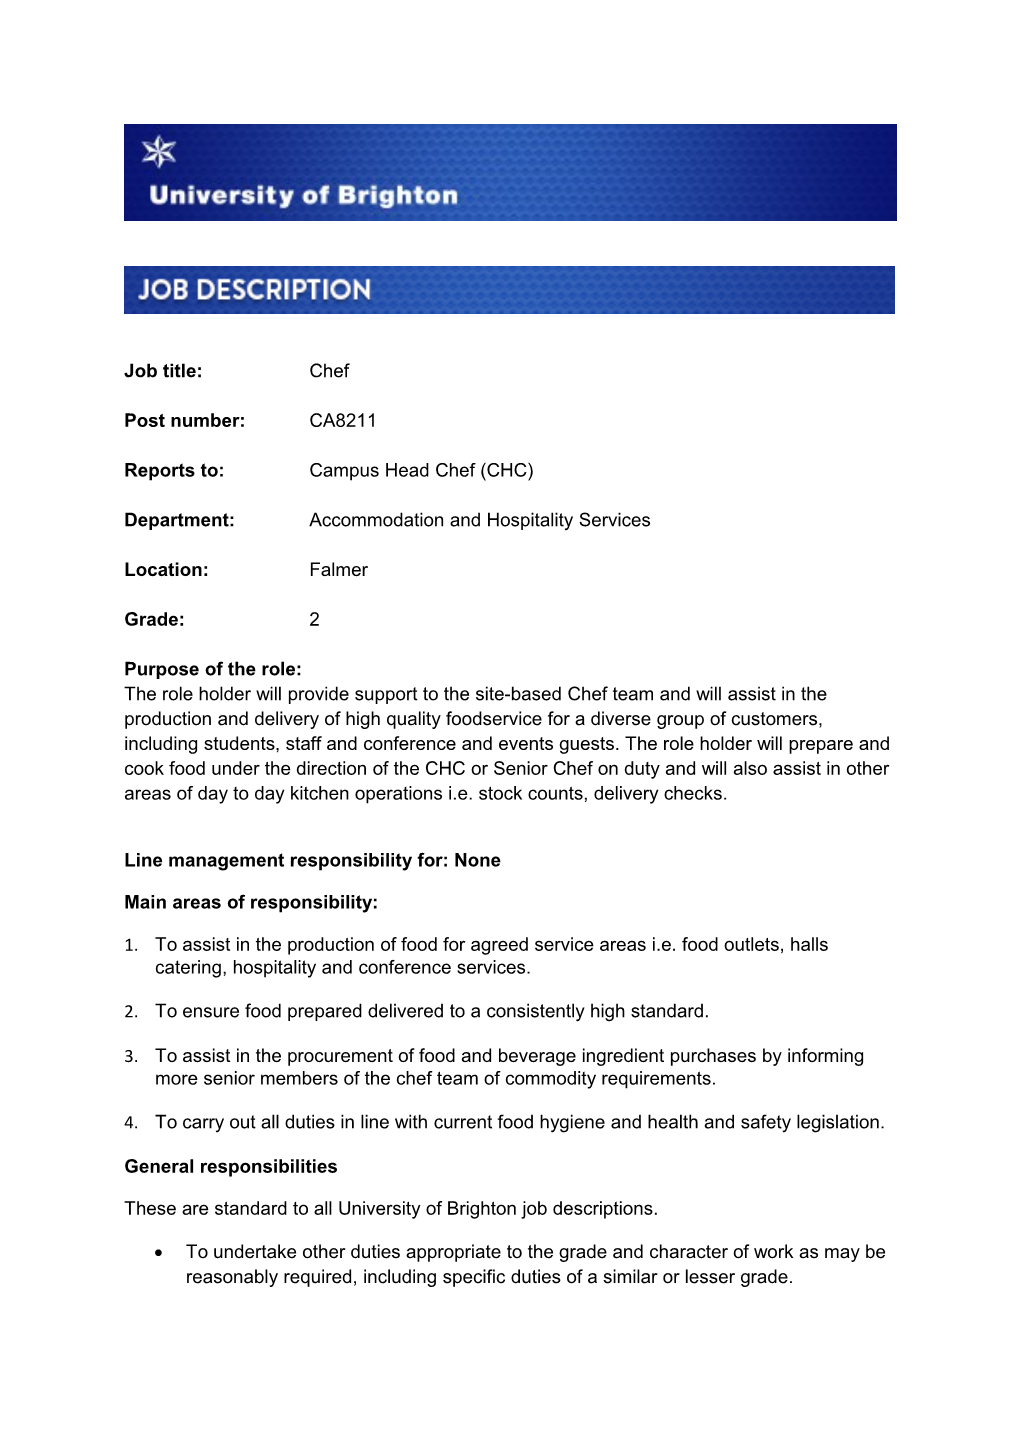 Reports To:Campus Head Chef (CHC)